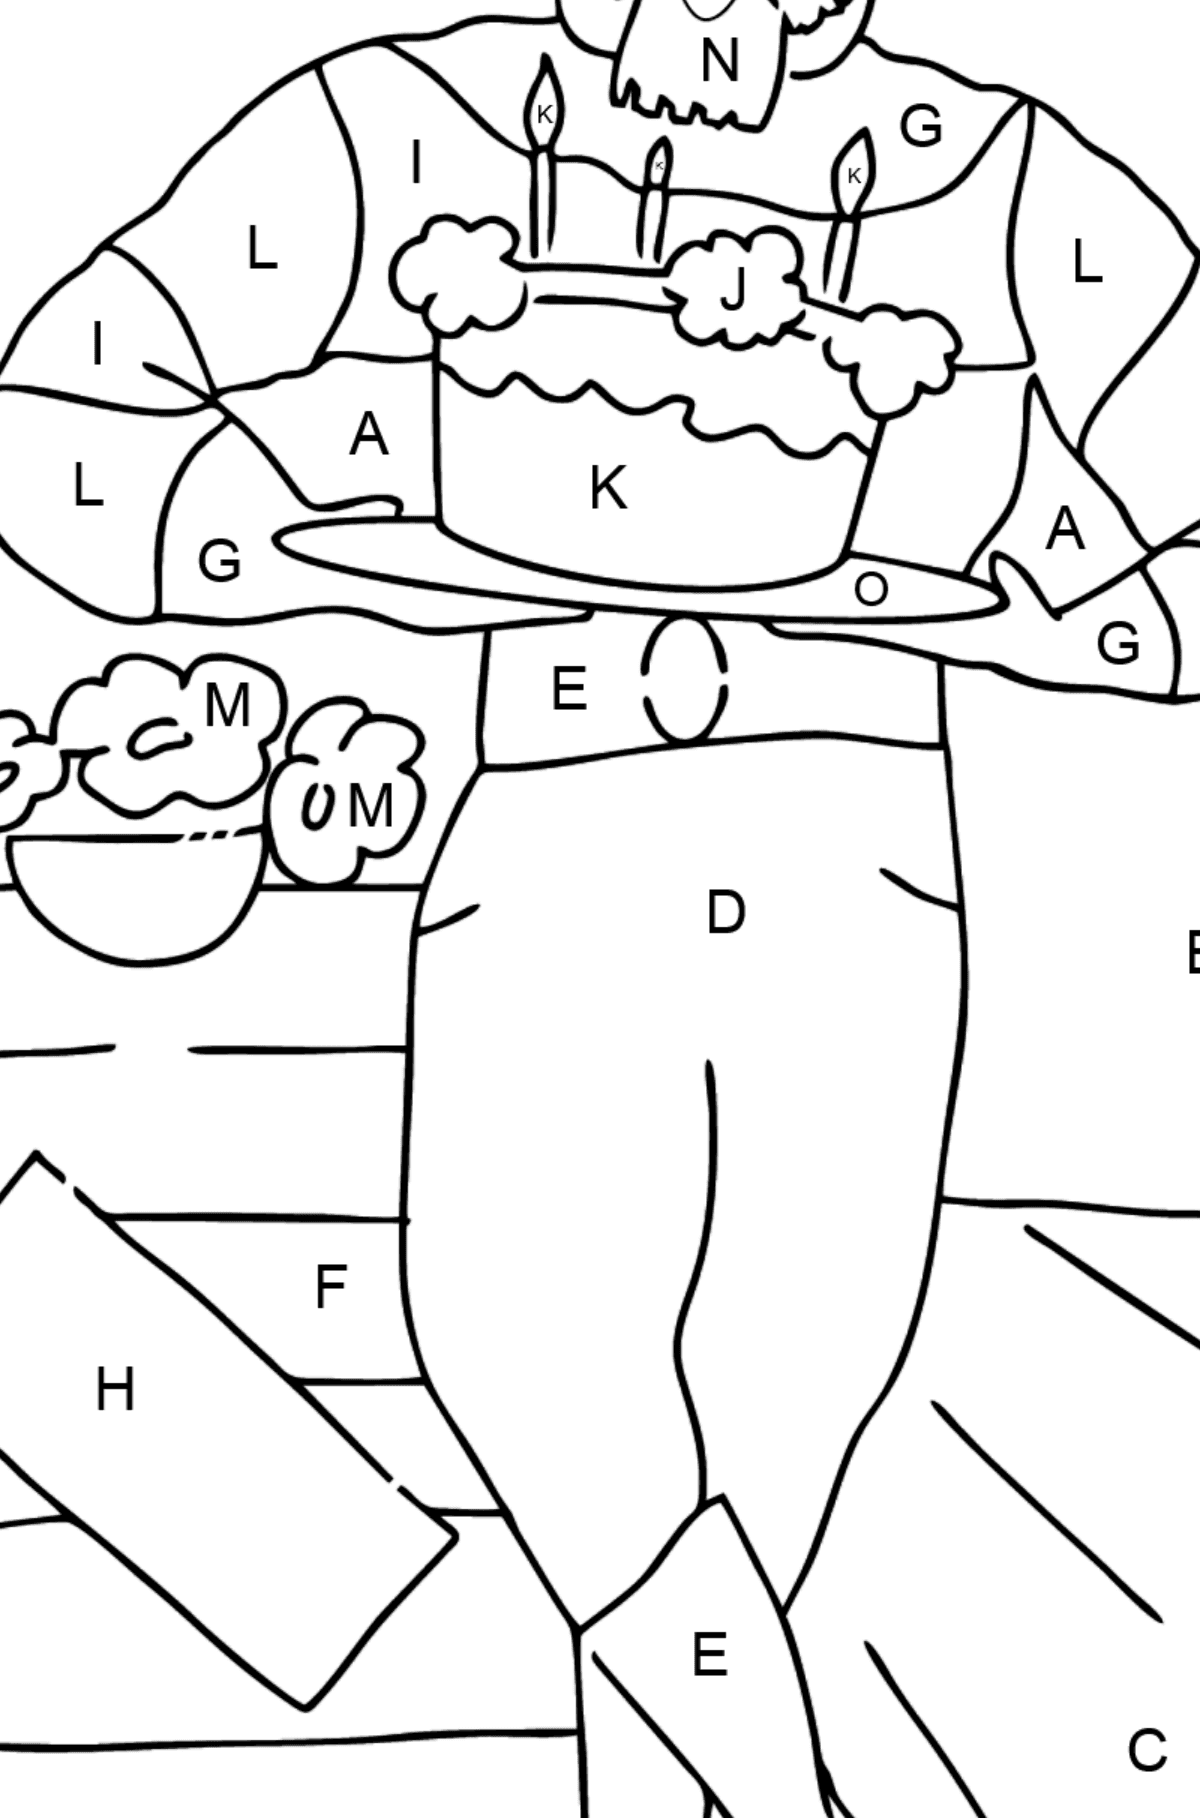 Coloring Page - A Pirate is Waiting for Guests - Coloring by Letters for Kids